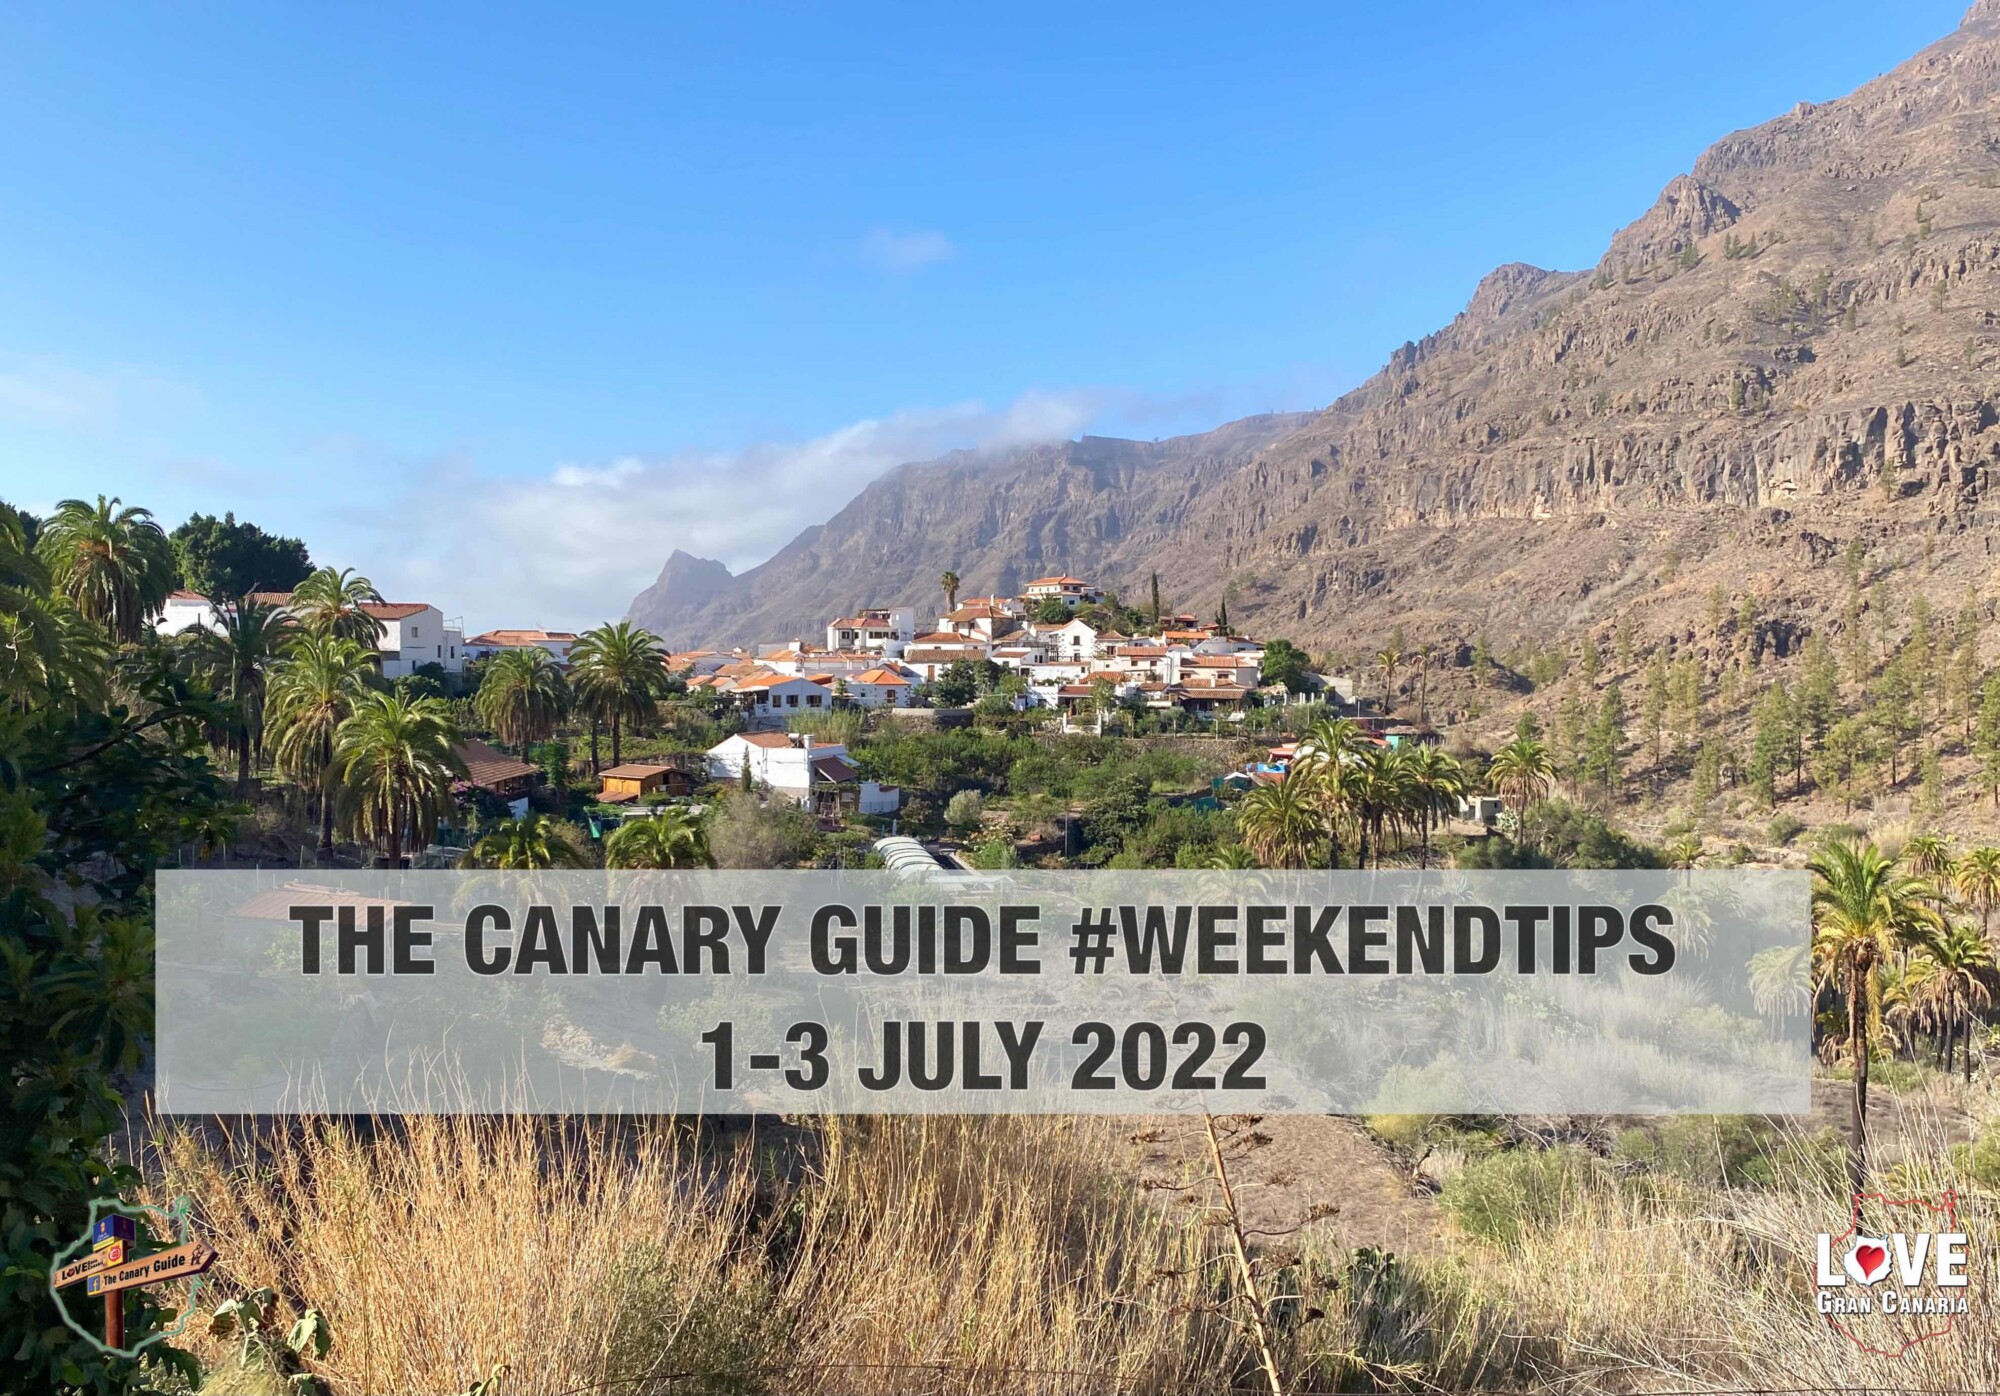 The Canary Guide #WeekendTips 1-3 July 2022